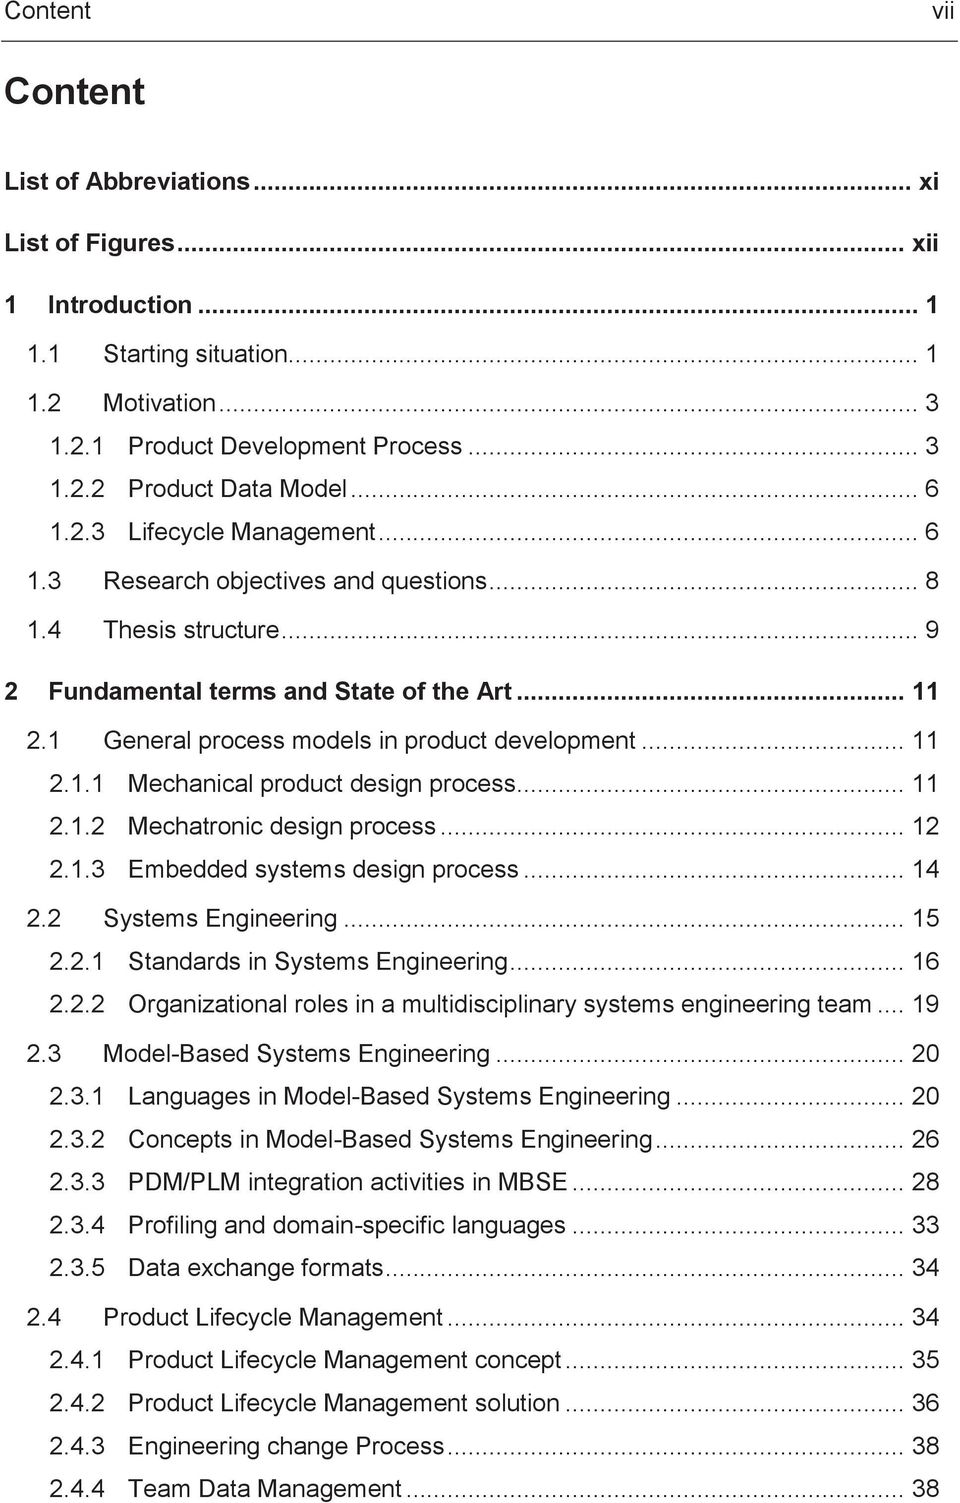 1 General process models in product development... 11 2.1.1 Mechanical product design process... 11 2.1.2 Mechatronic design process... 12 2.1.3 Embedded systems design process... 14 2.